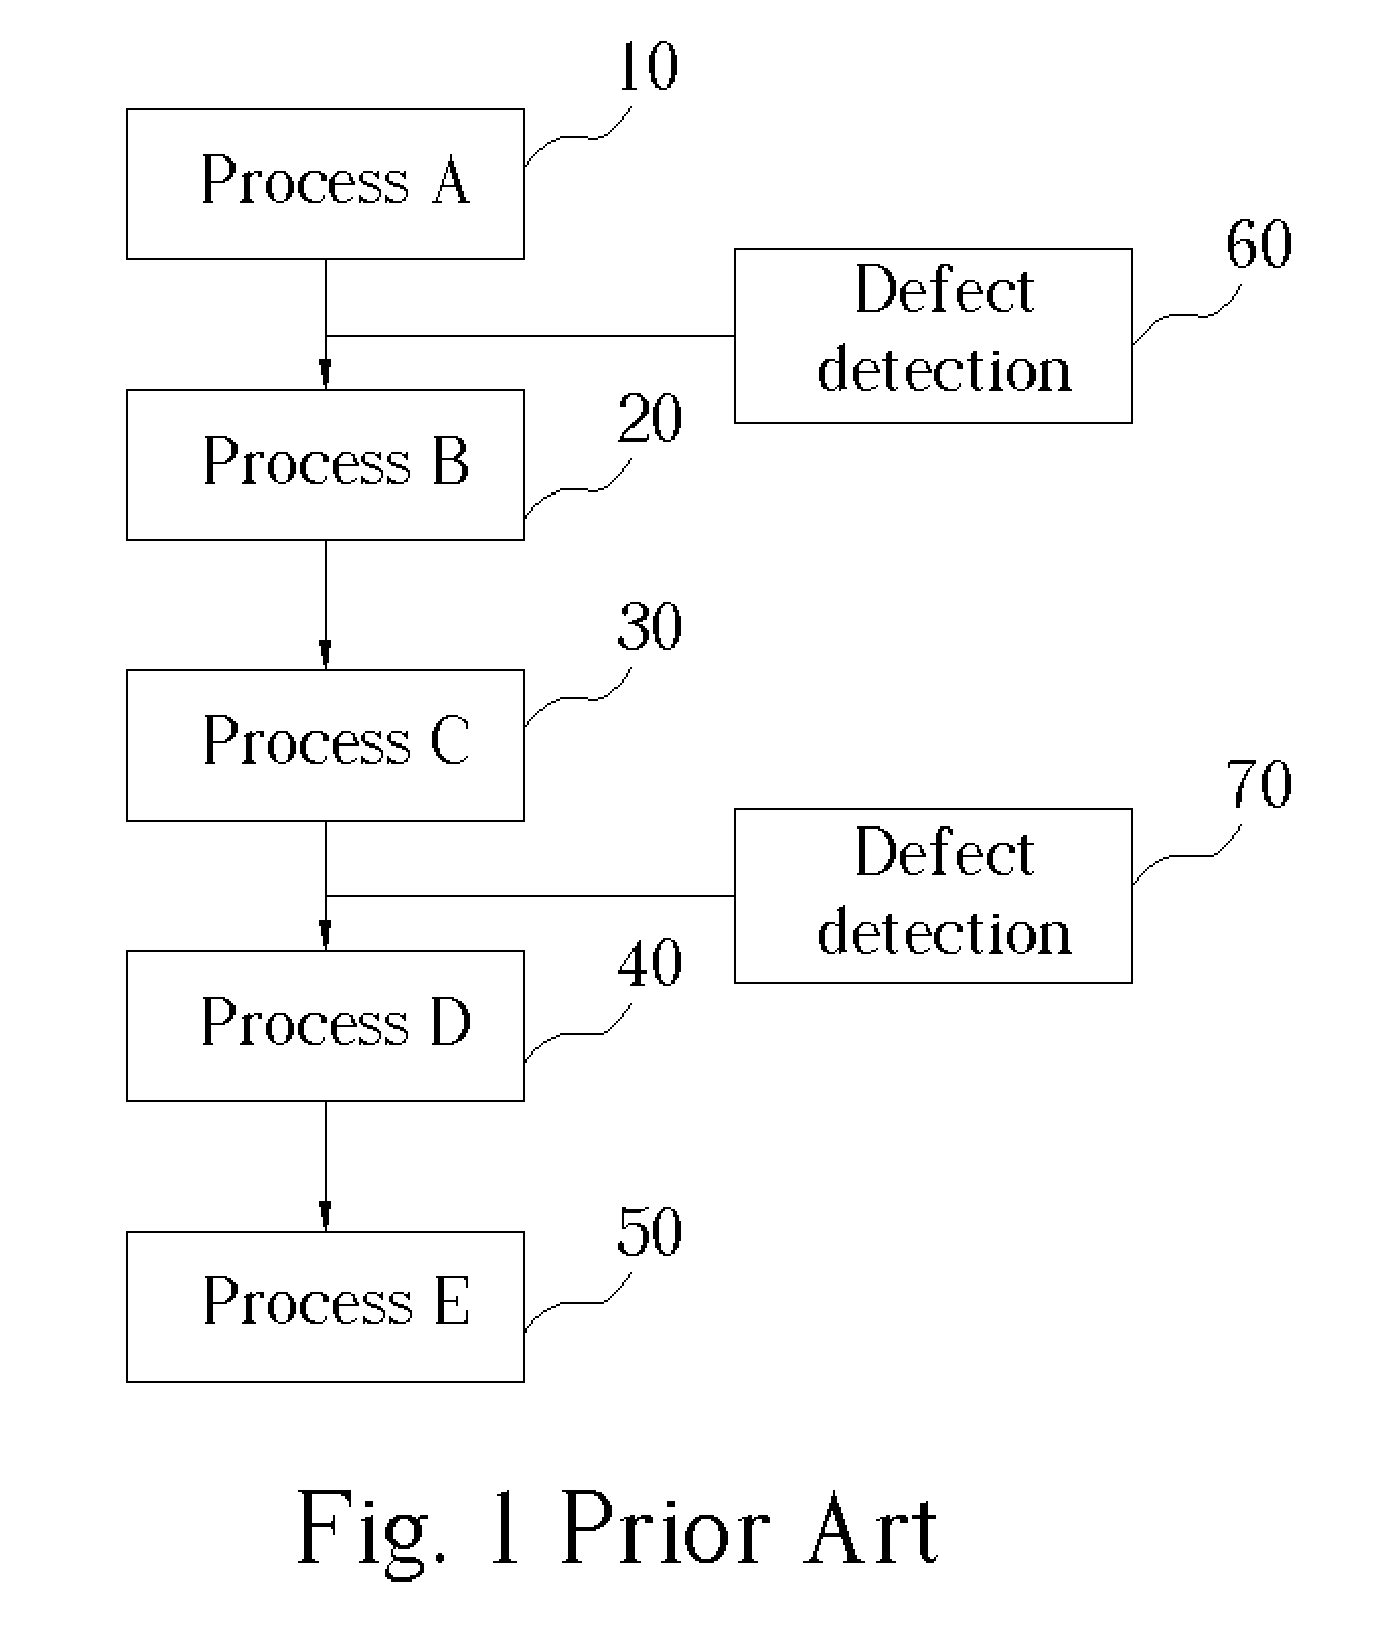 Method of defect root cause analysis